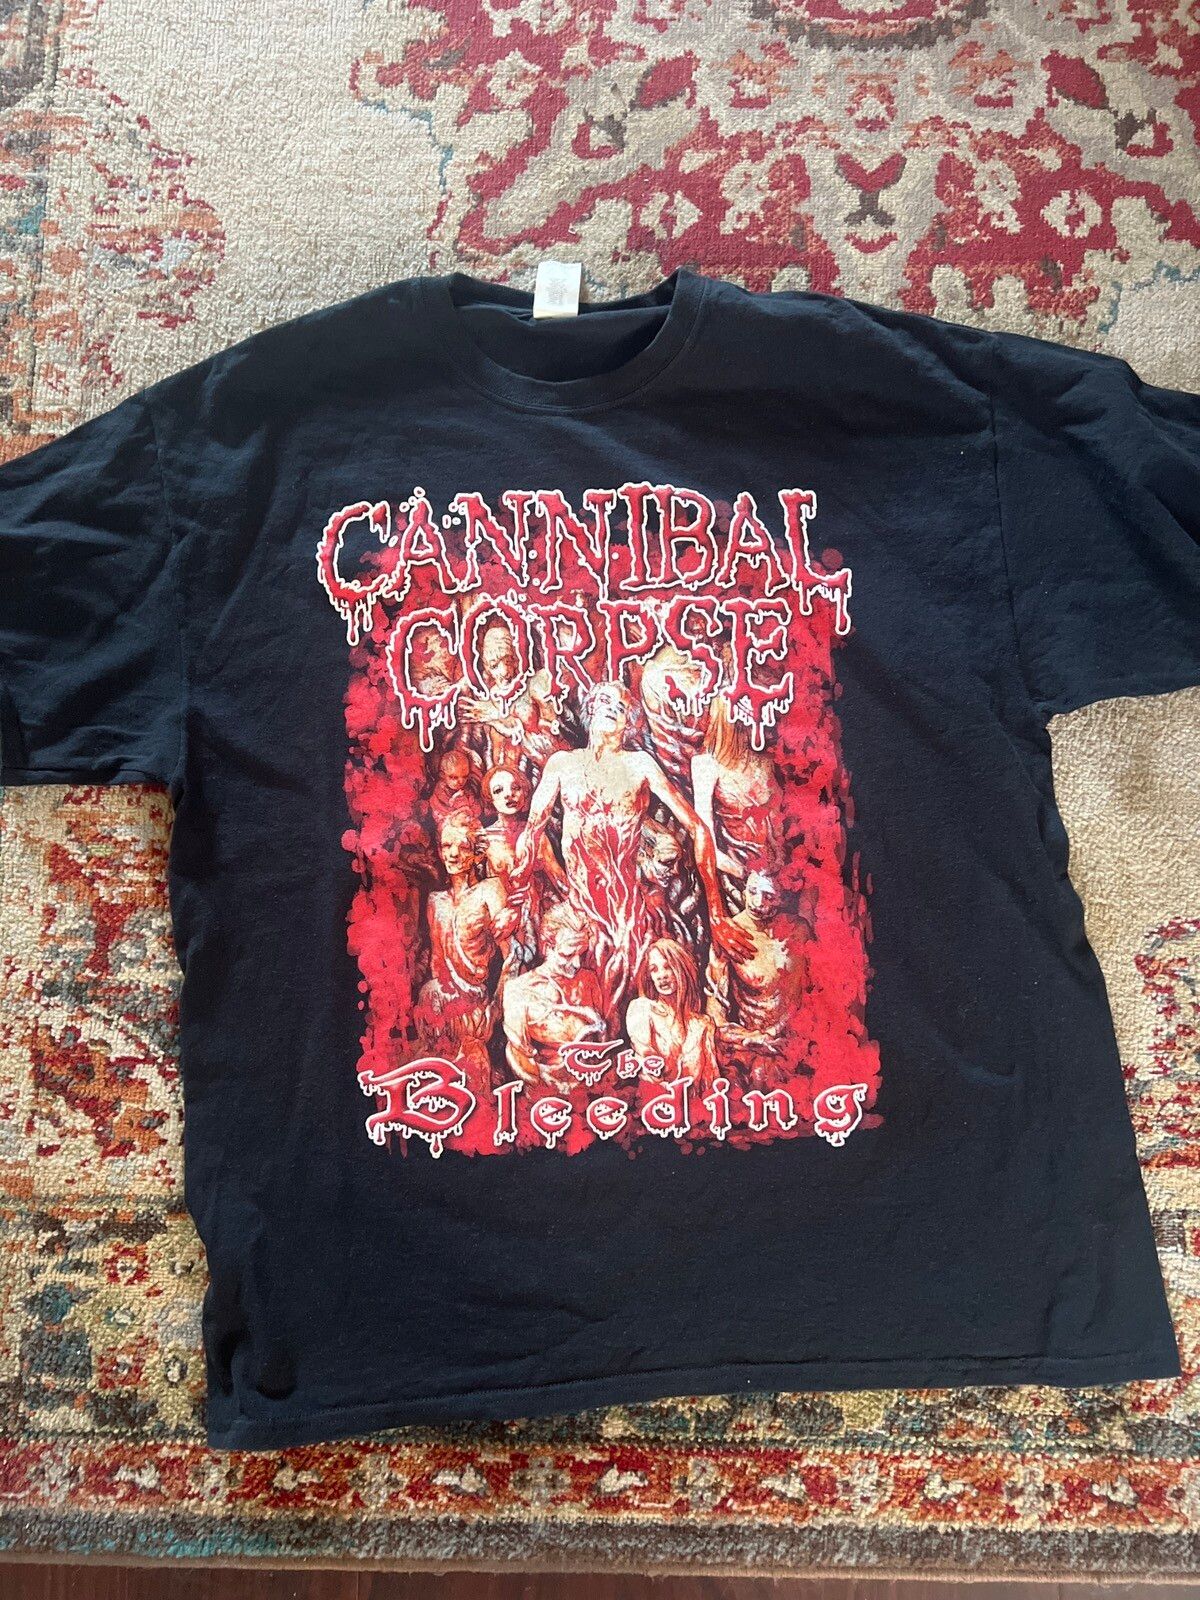 Vintage Cannibal corpse t shirt | Grailed